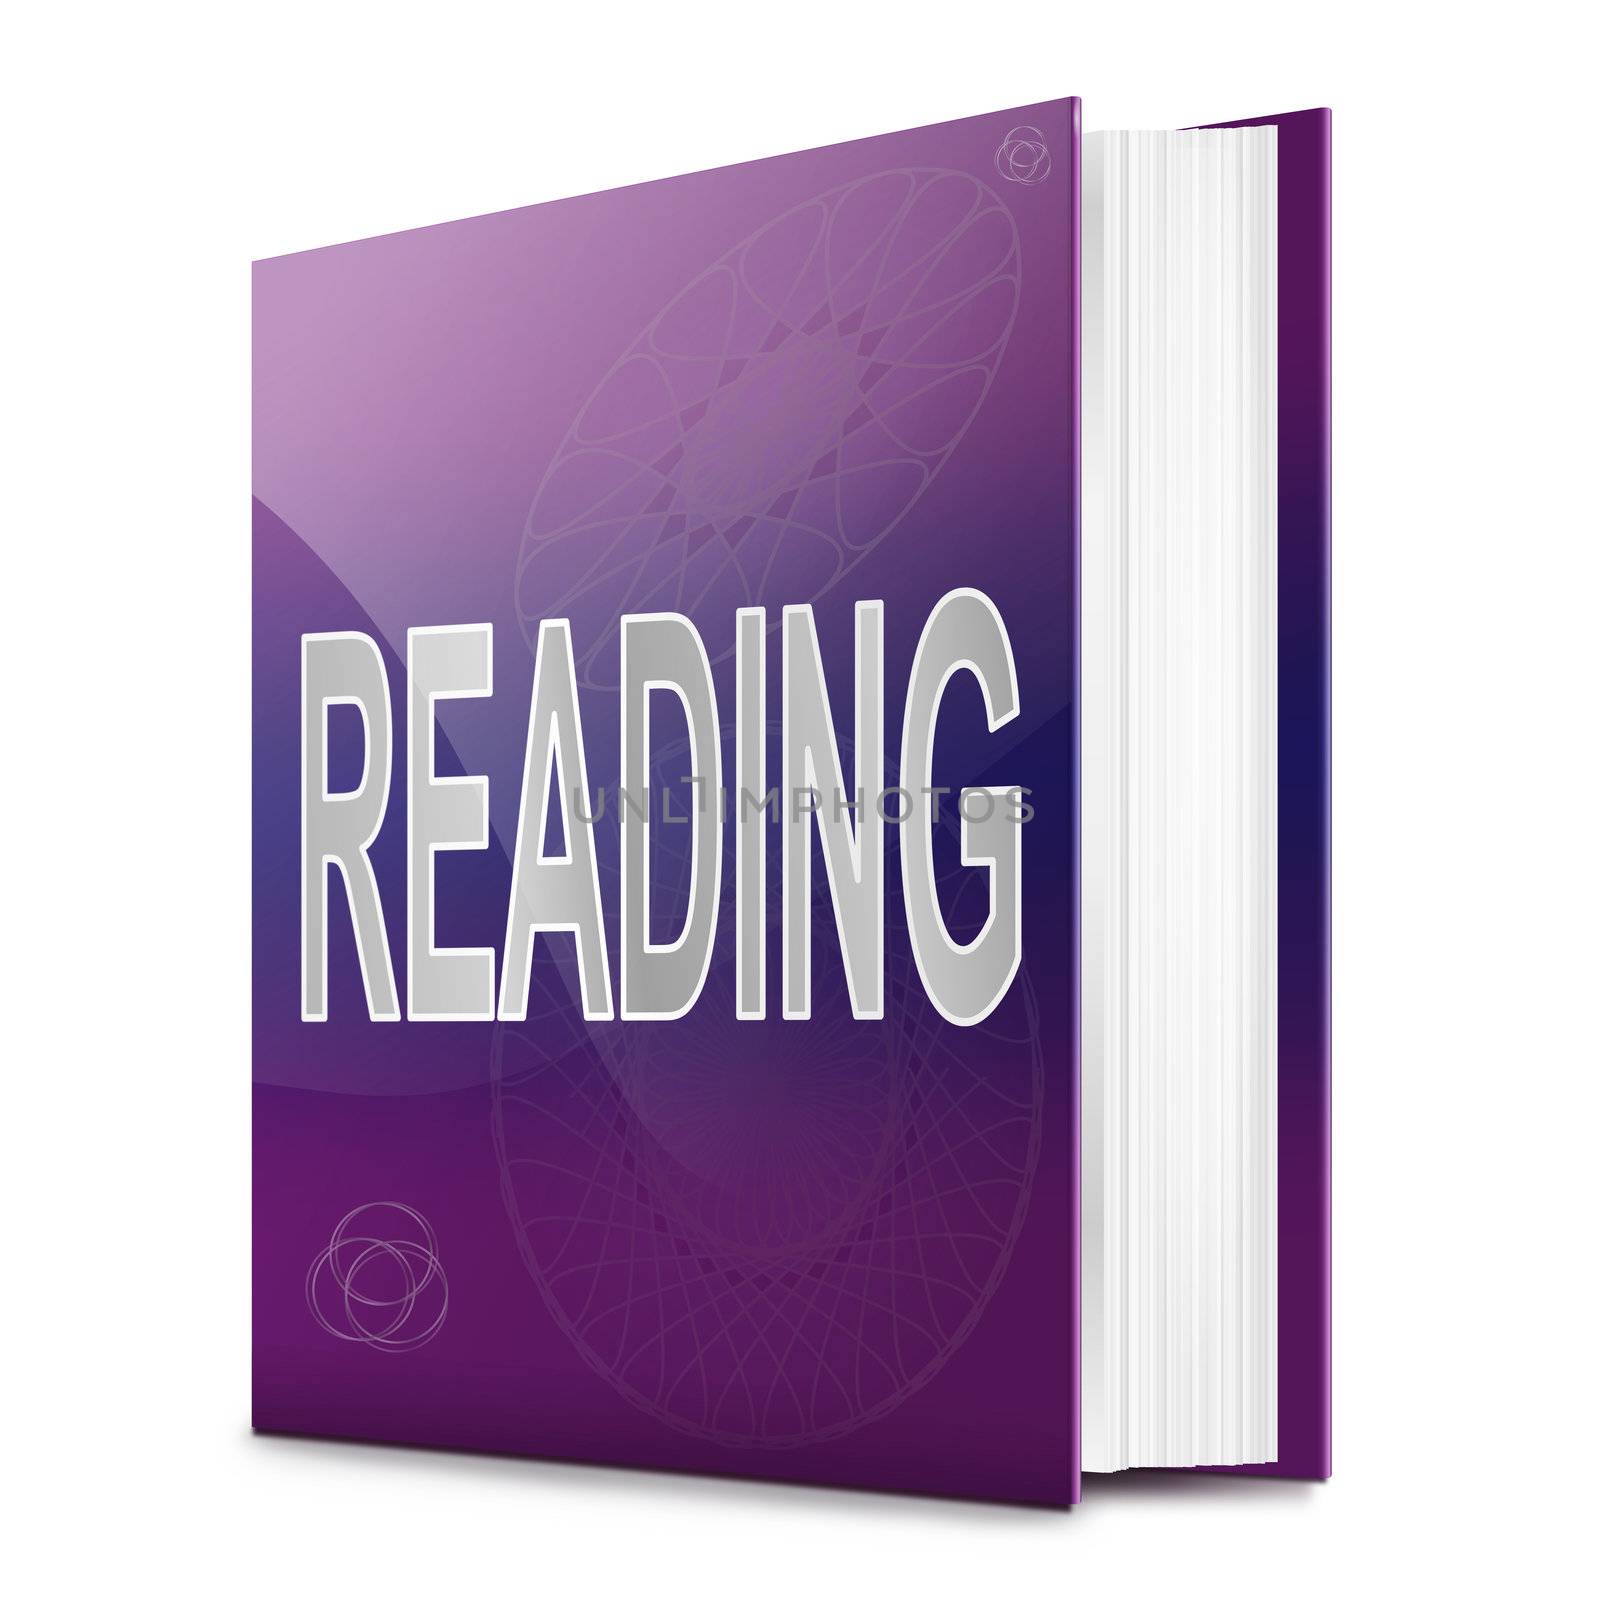 Illustration depicting a book with a reading concept title. White background.